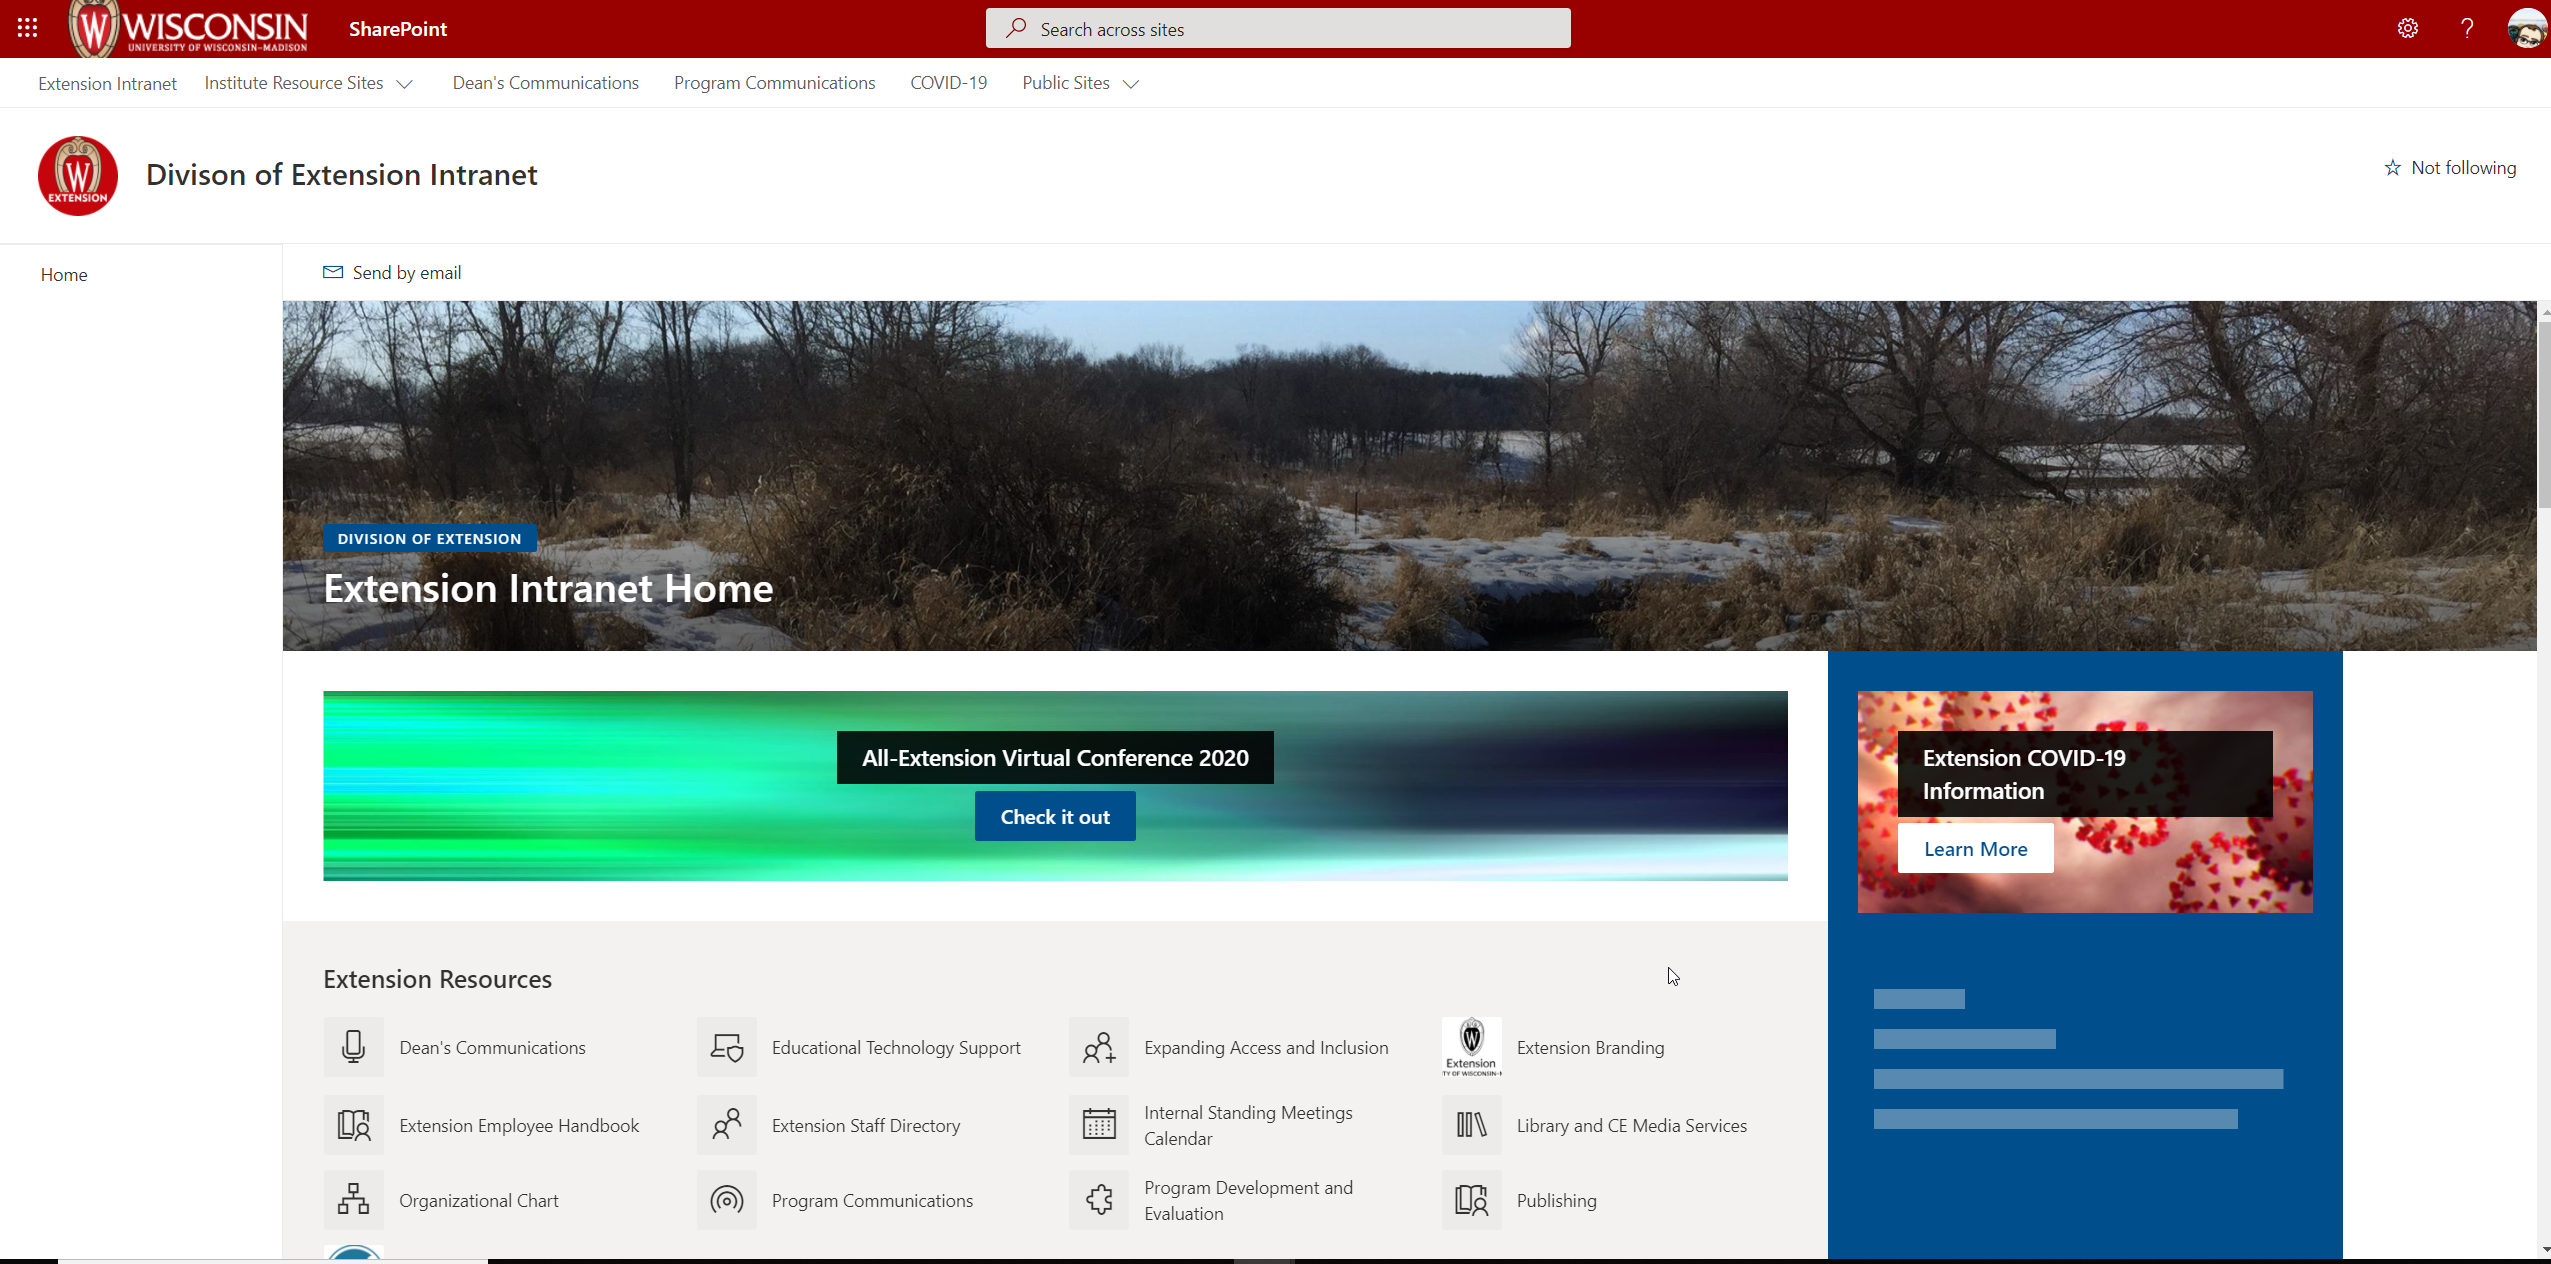 Division of Extension Intranet Home Page